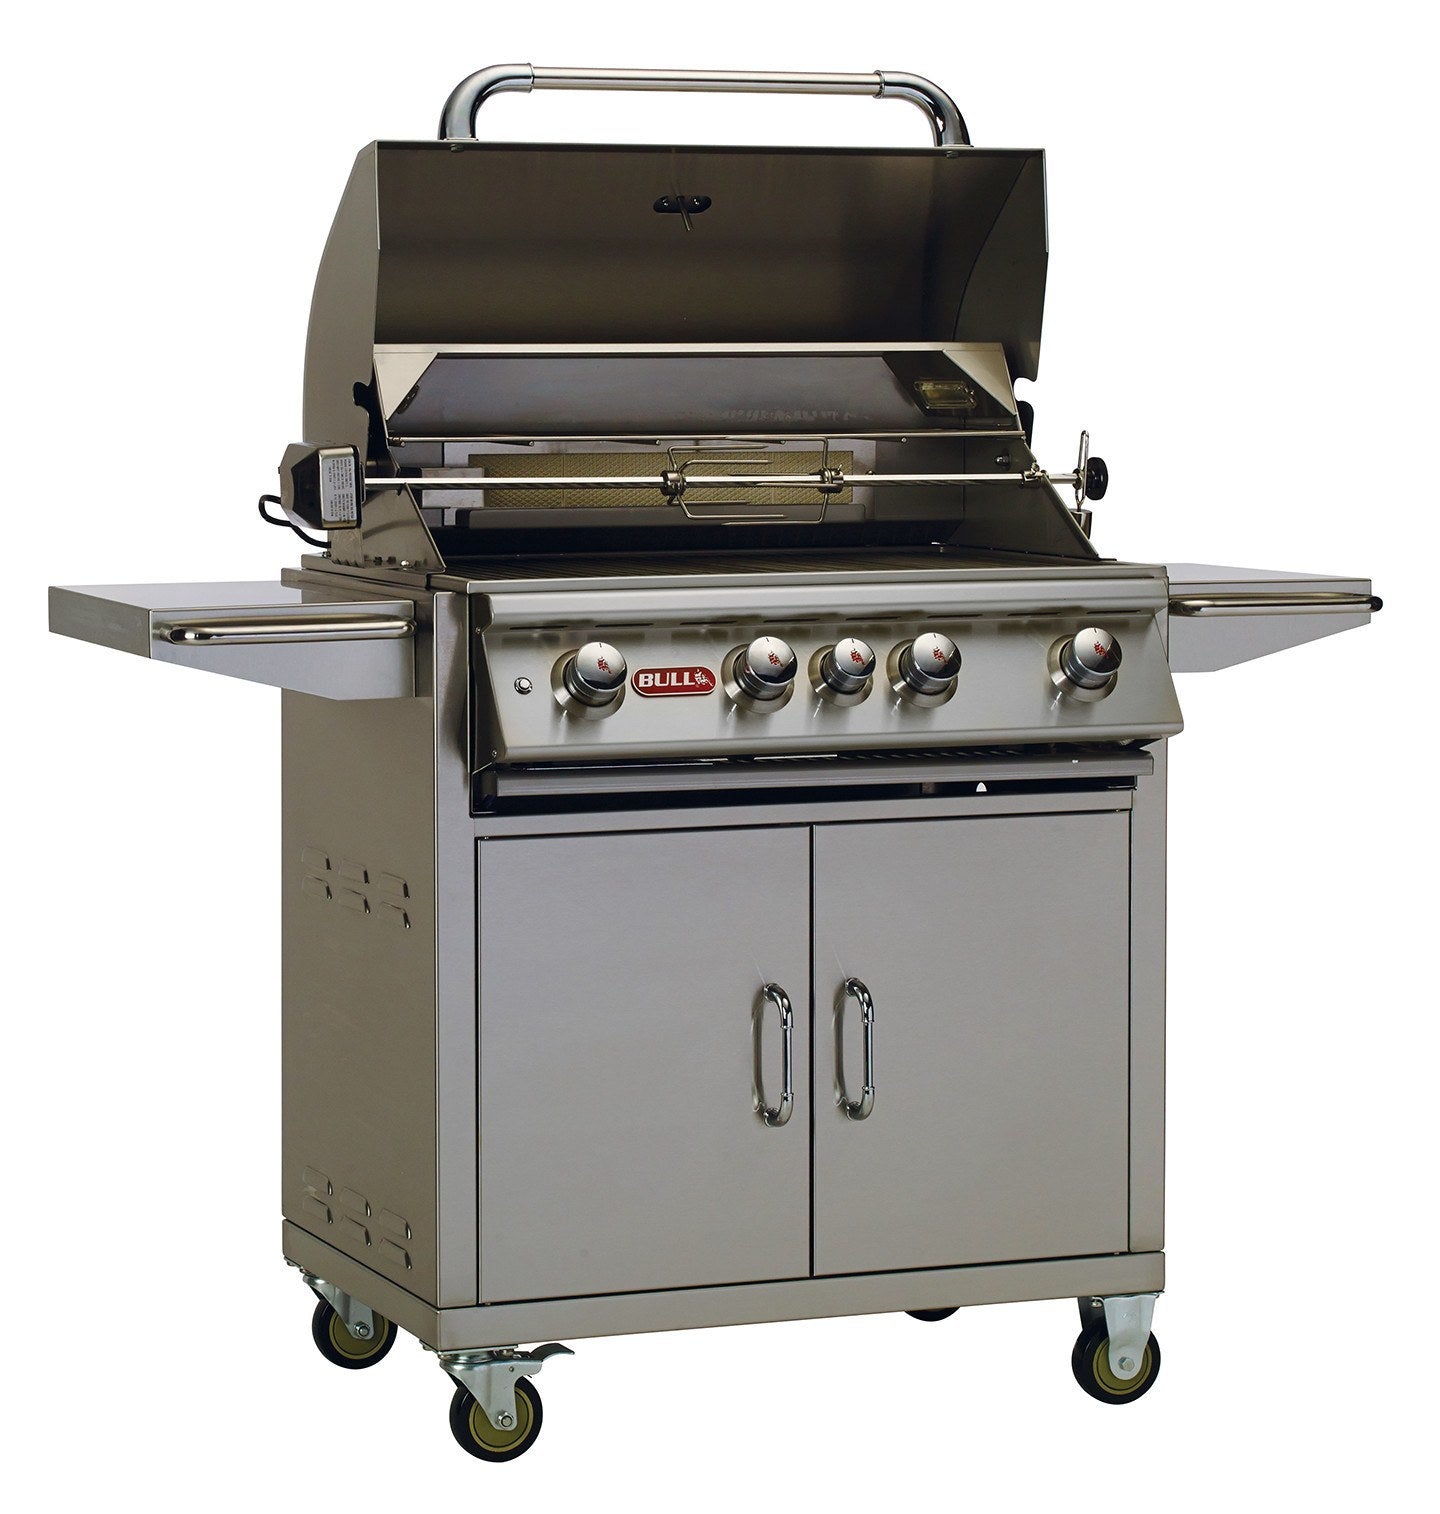 Outdoor Cooking Bull Outdoor Products 44000 Bull Bbq Angus Grill Cart With Twin Lighting System Propane 1 ?v=1538858496